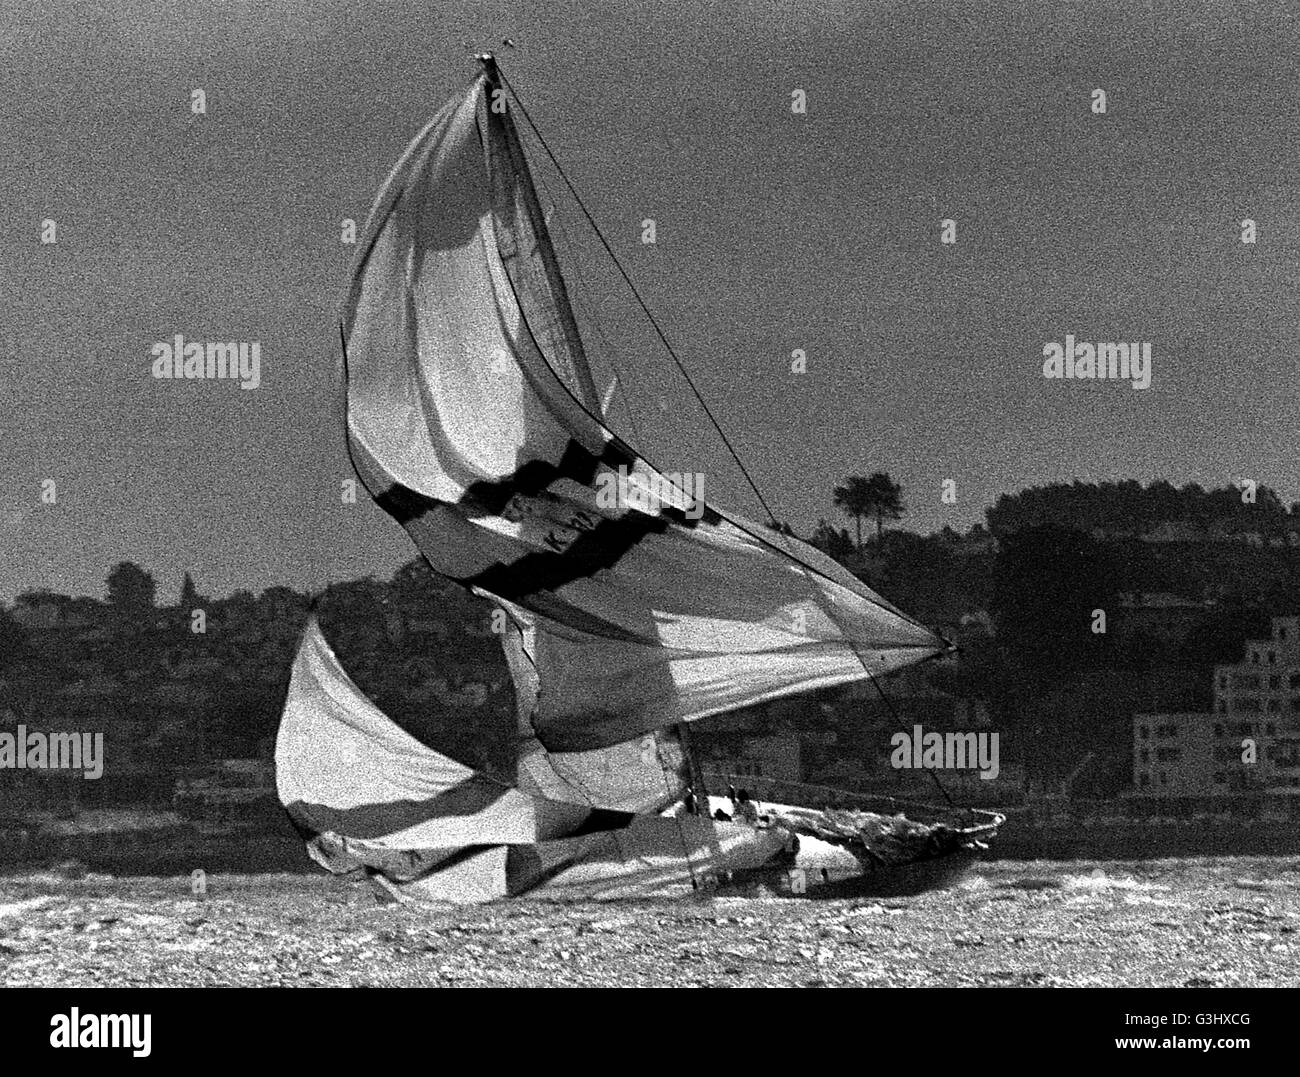 AJAXNETPHOTO. 1979. SOLENT, ENGLAND. - ADMIRAL'S CUP - SOLENT INSHORE RACE. BLIZZARD (GBR) IN TROUBLE IN GUSTY CONDITIONS. PHOTO:JONATHAN EASTLAND/AJAX REF:79 2025 Stock Photo